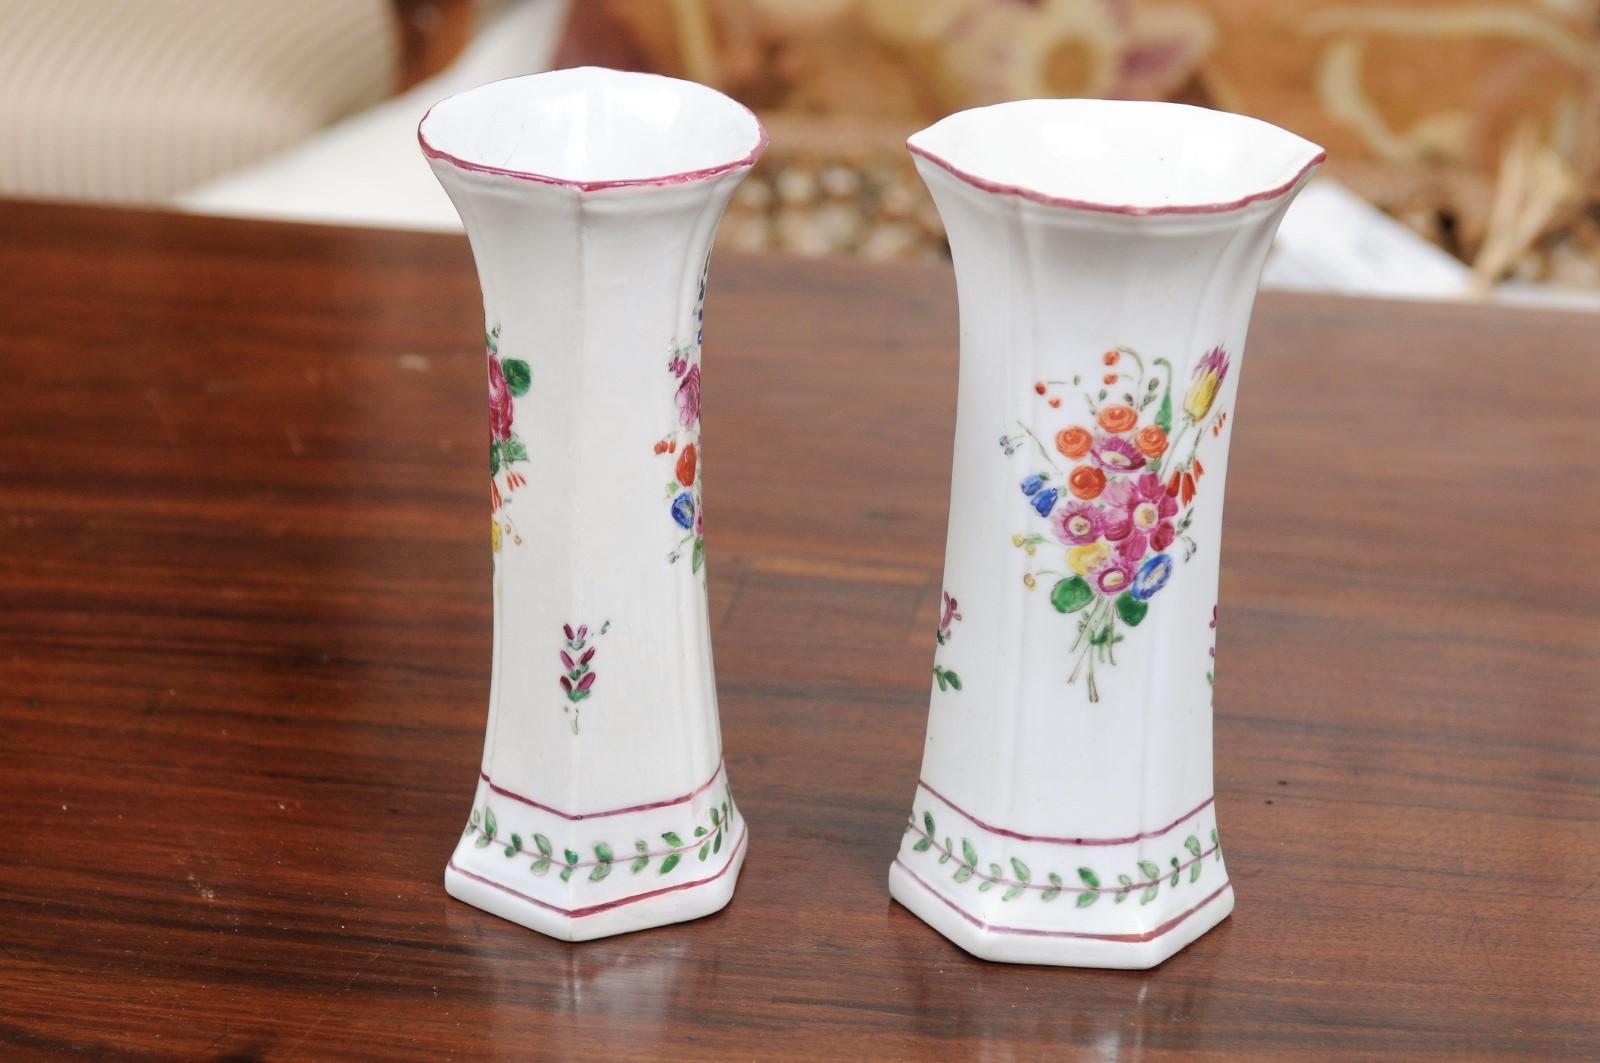 Pair of Italian Porcelain Vases with Colorful Painted Floral Motifs, circa 1805 For Sale 6